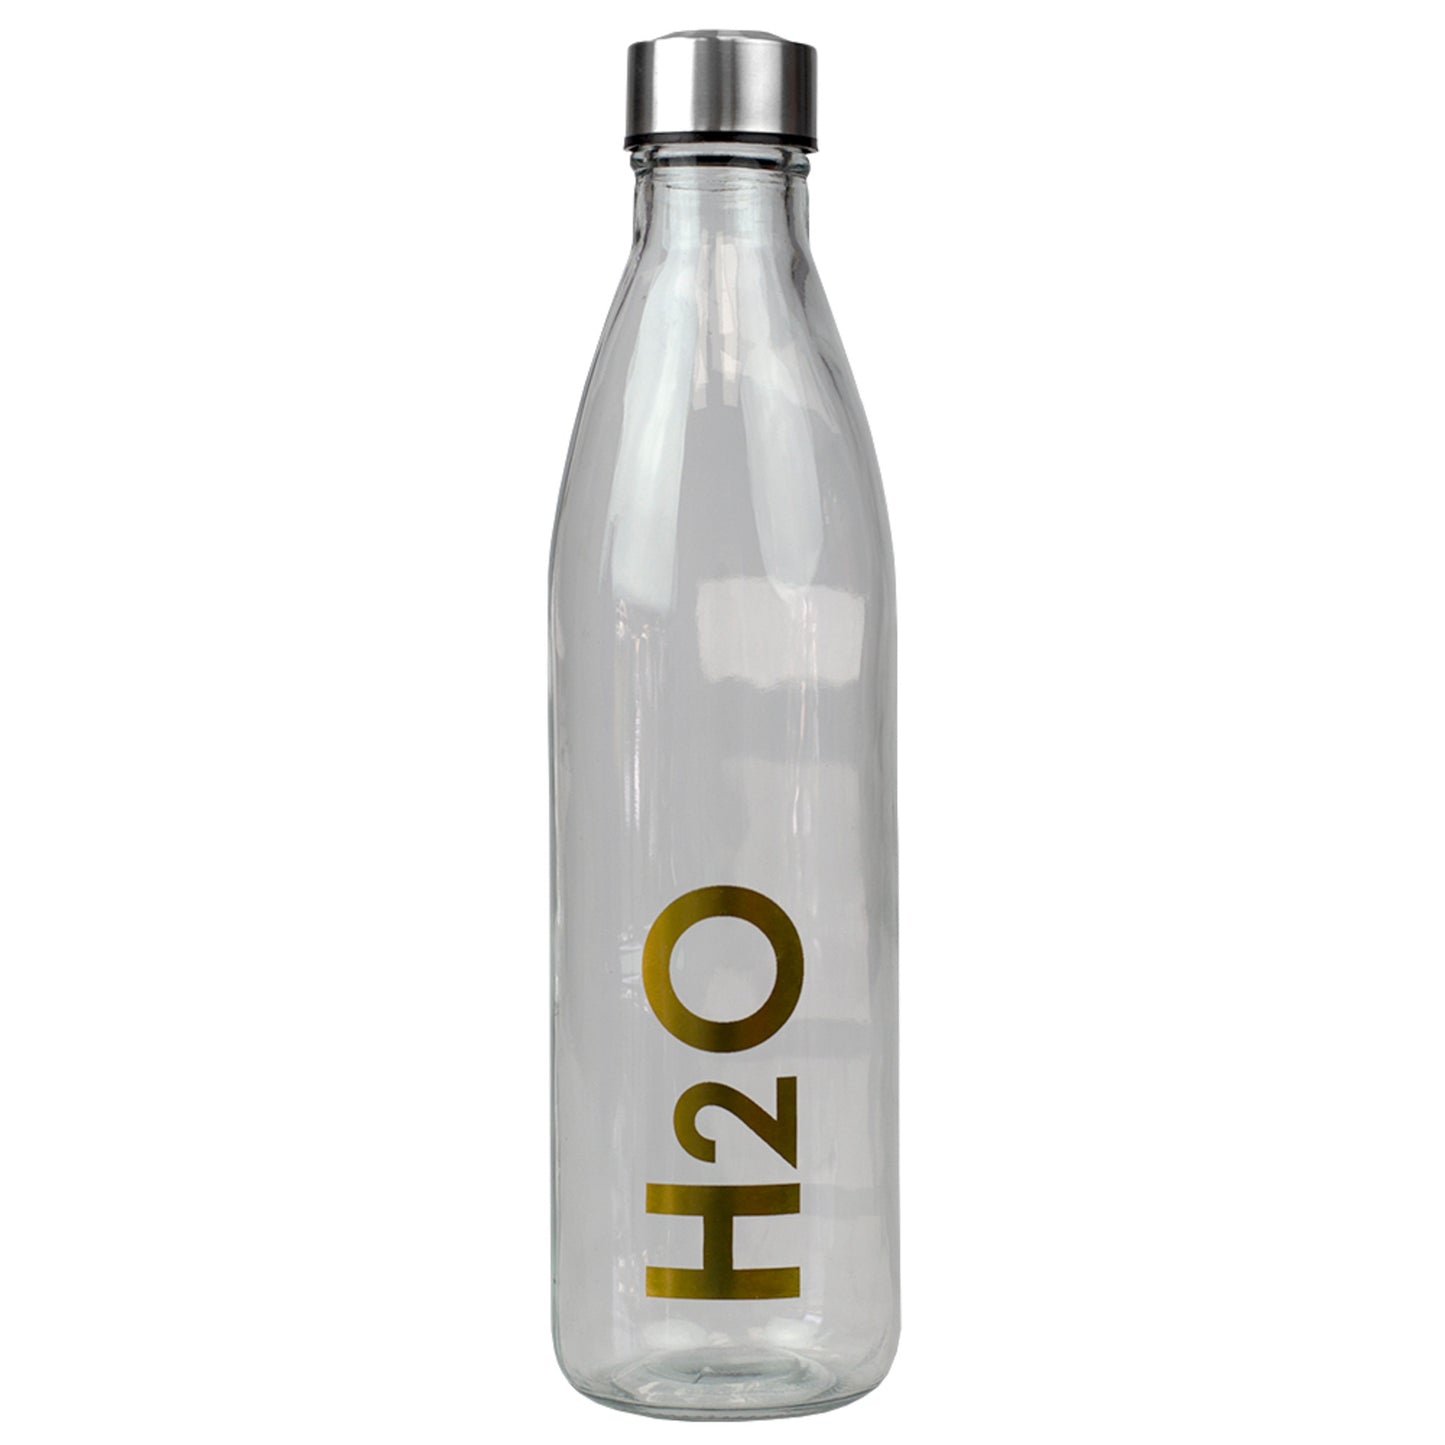 Home Basics H2O Clear 32 oz. Glass Travel Water Bottle with Easy Twist on Leak Proof Steel Cap, Gold - Gold